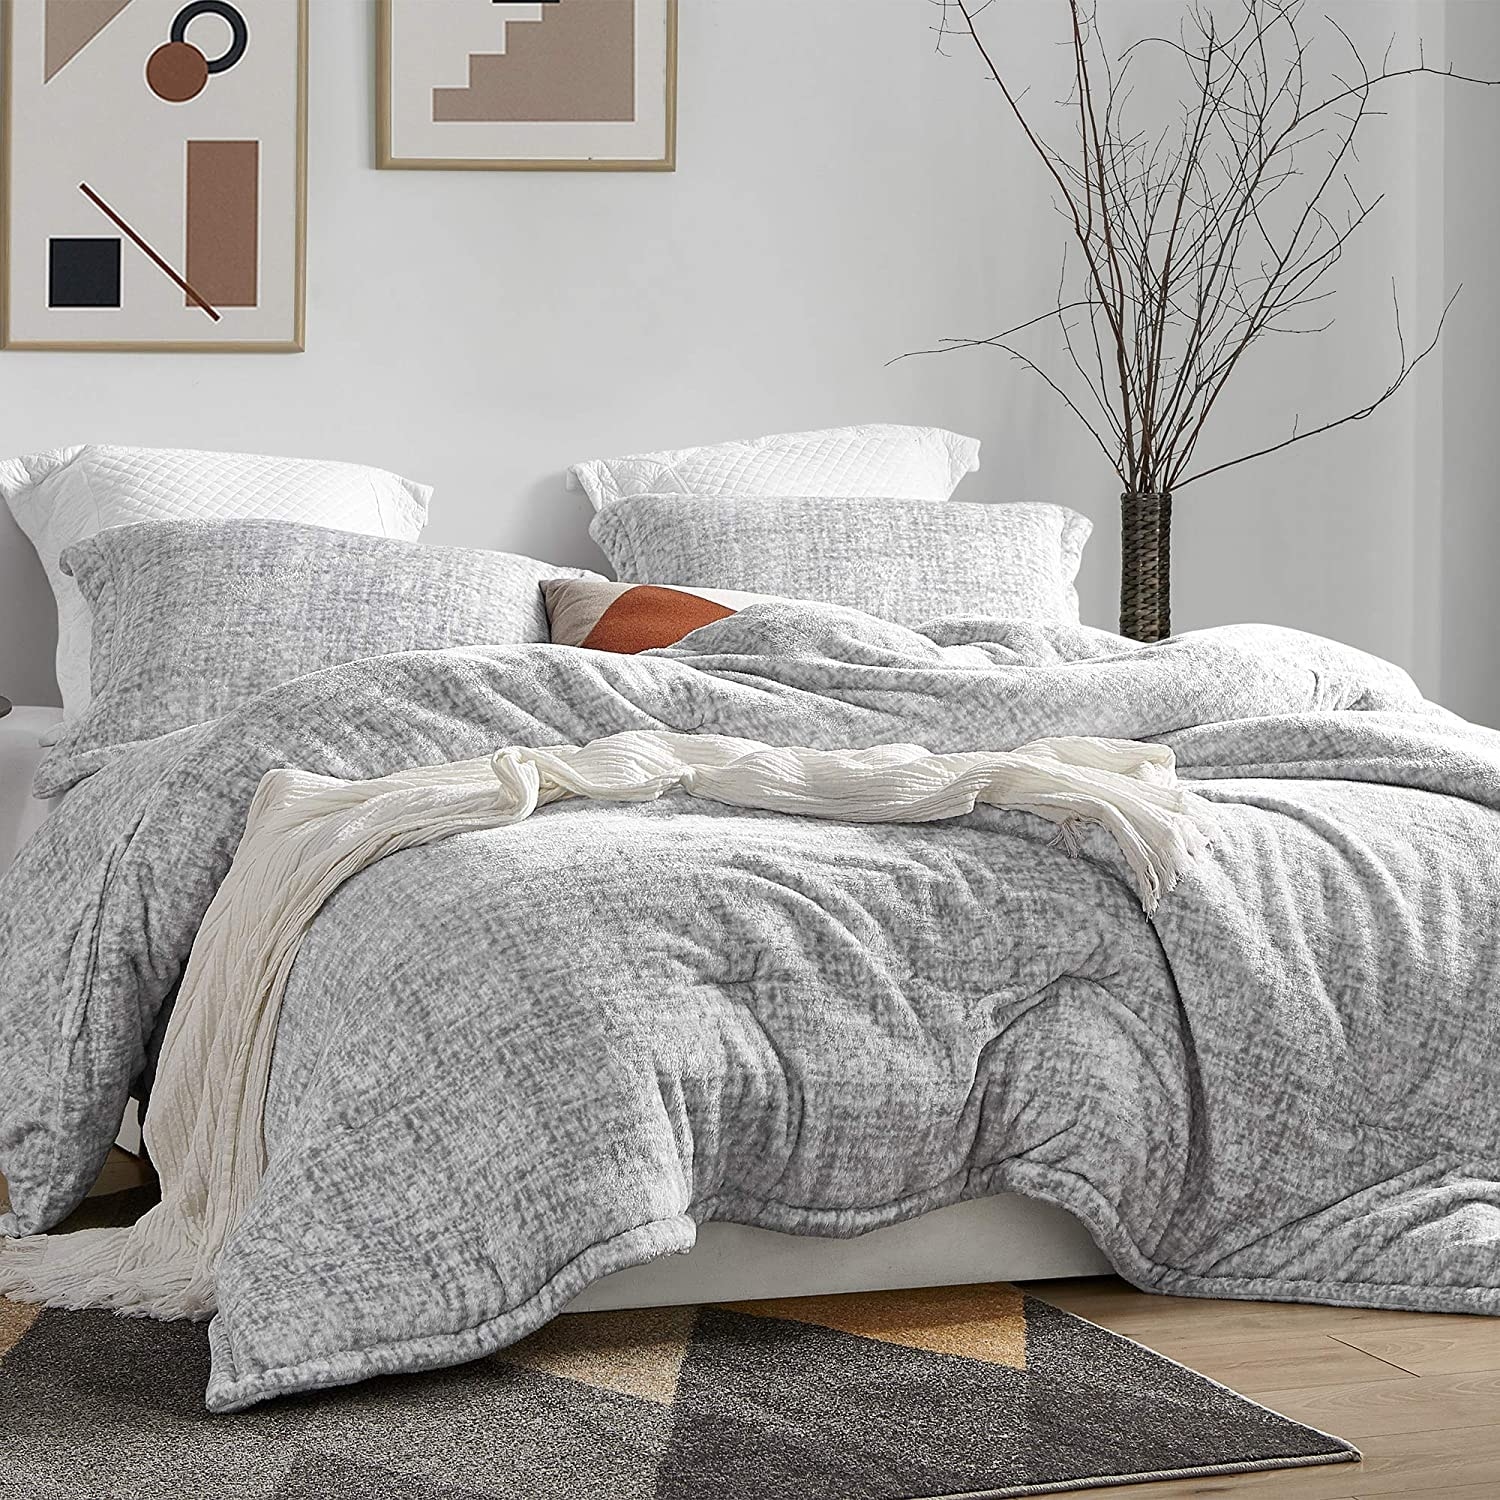 https://ak1.ostkcdn.com/images/products/is/images/direct/beecb3bc835d1bfb6360bf5f77c0185e85517cd2/Rheum---Coma-Inducer-Oversized-Comforter.jpg